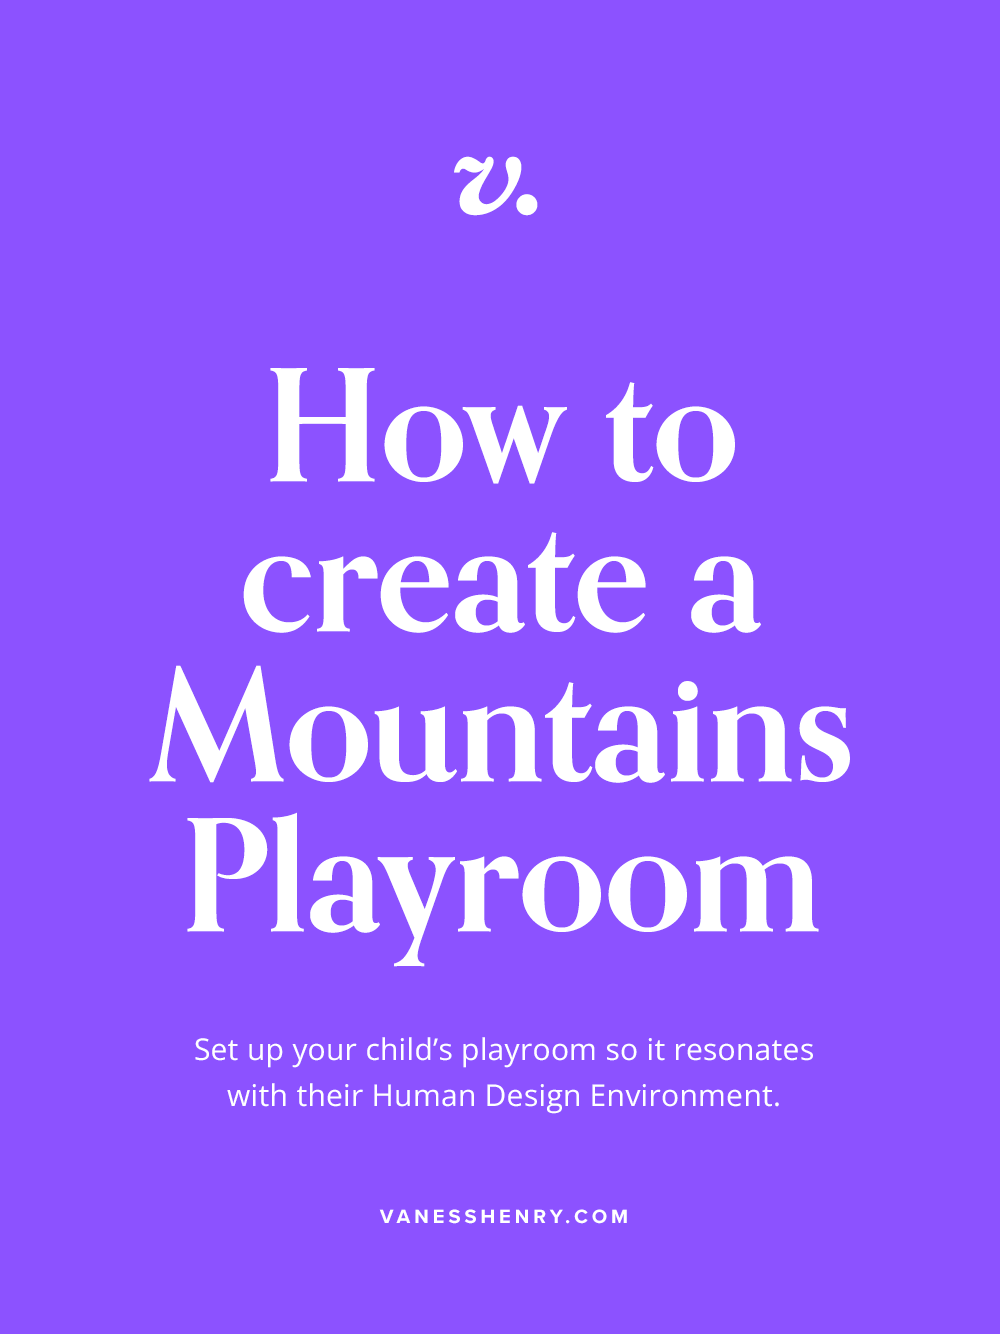 Mountains Playroom 3.png